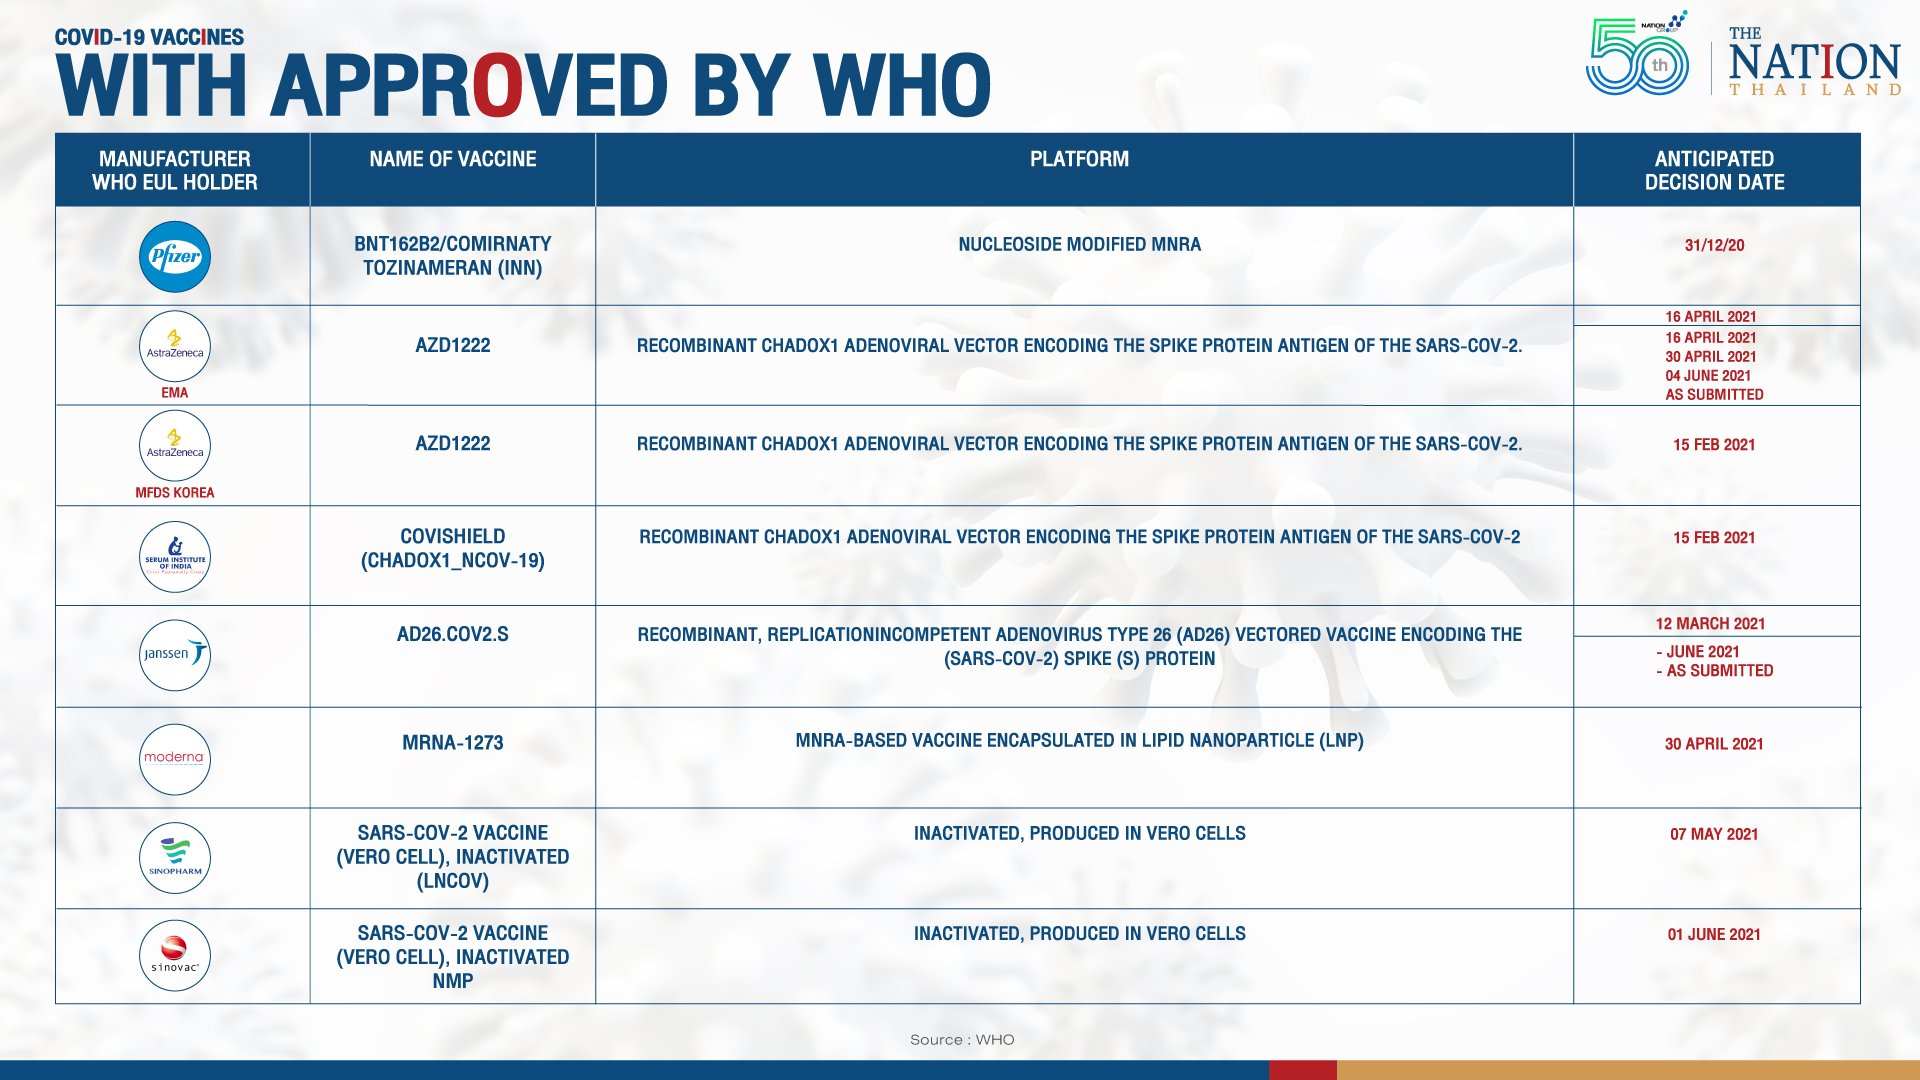 WHO approved Covid-19 vaccines